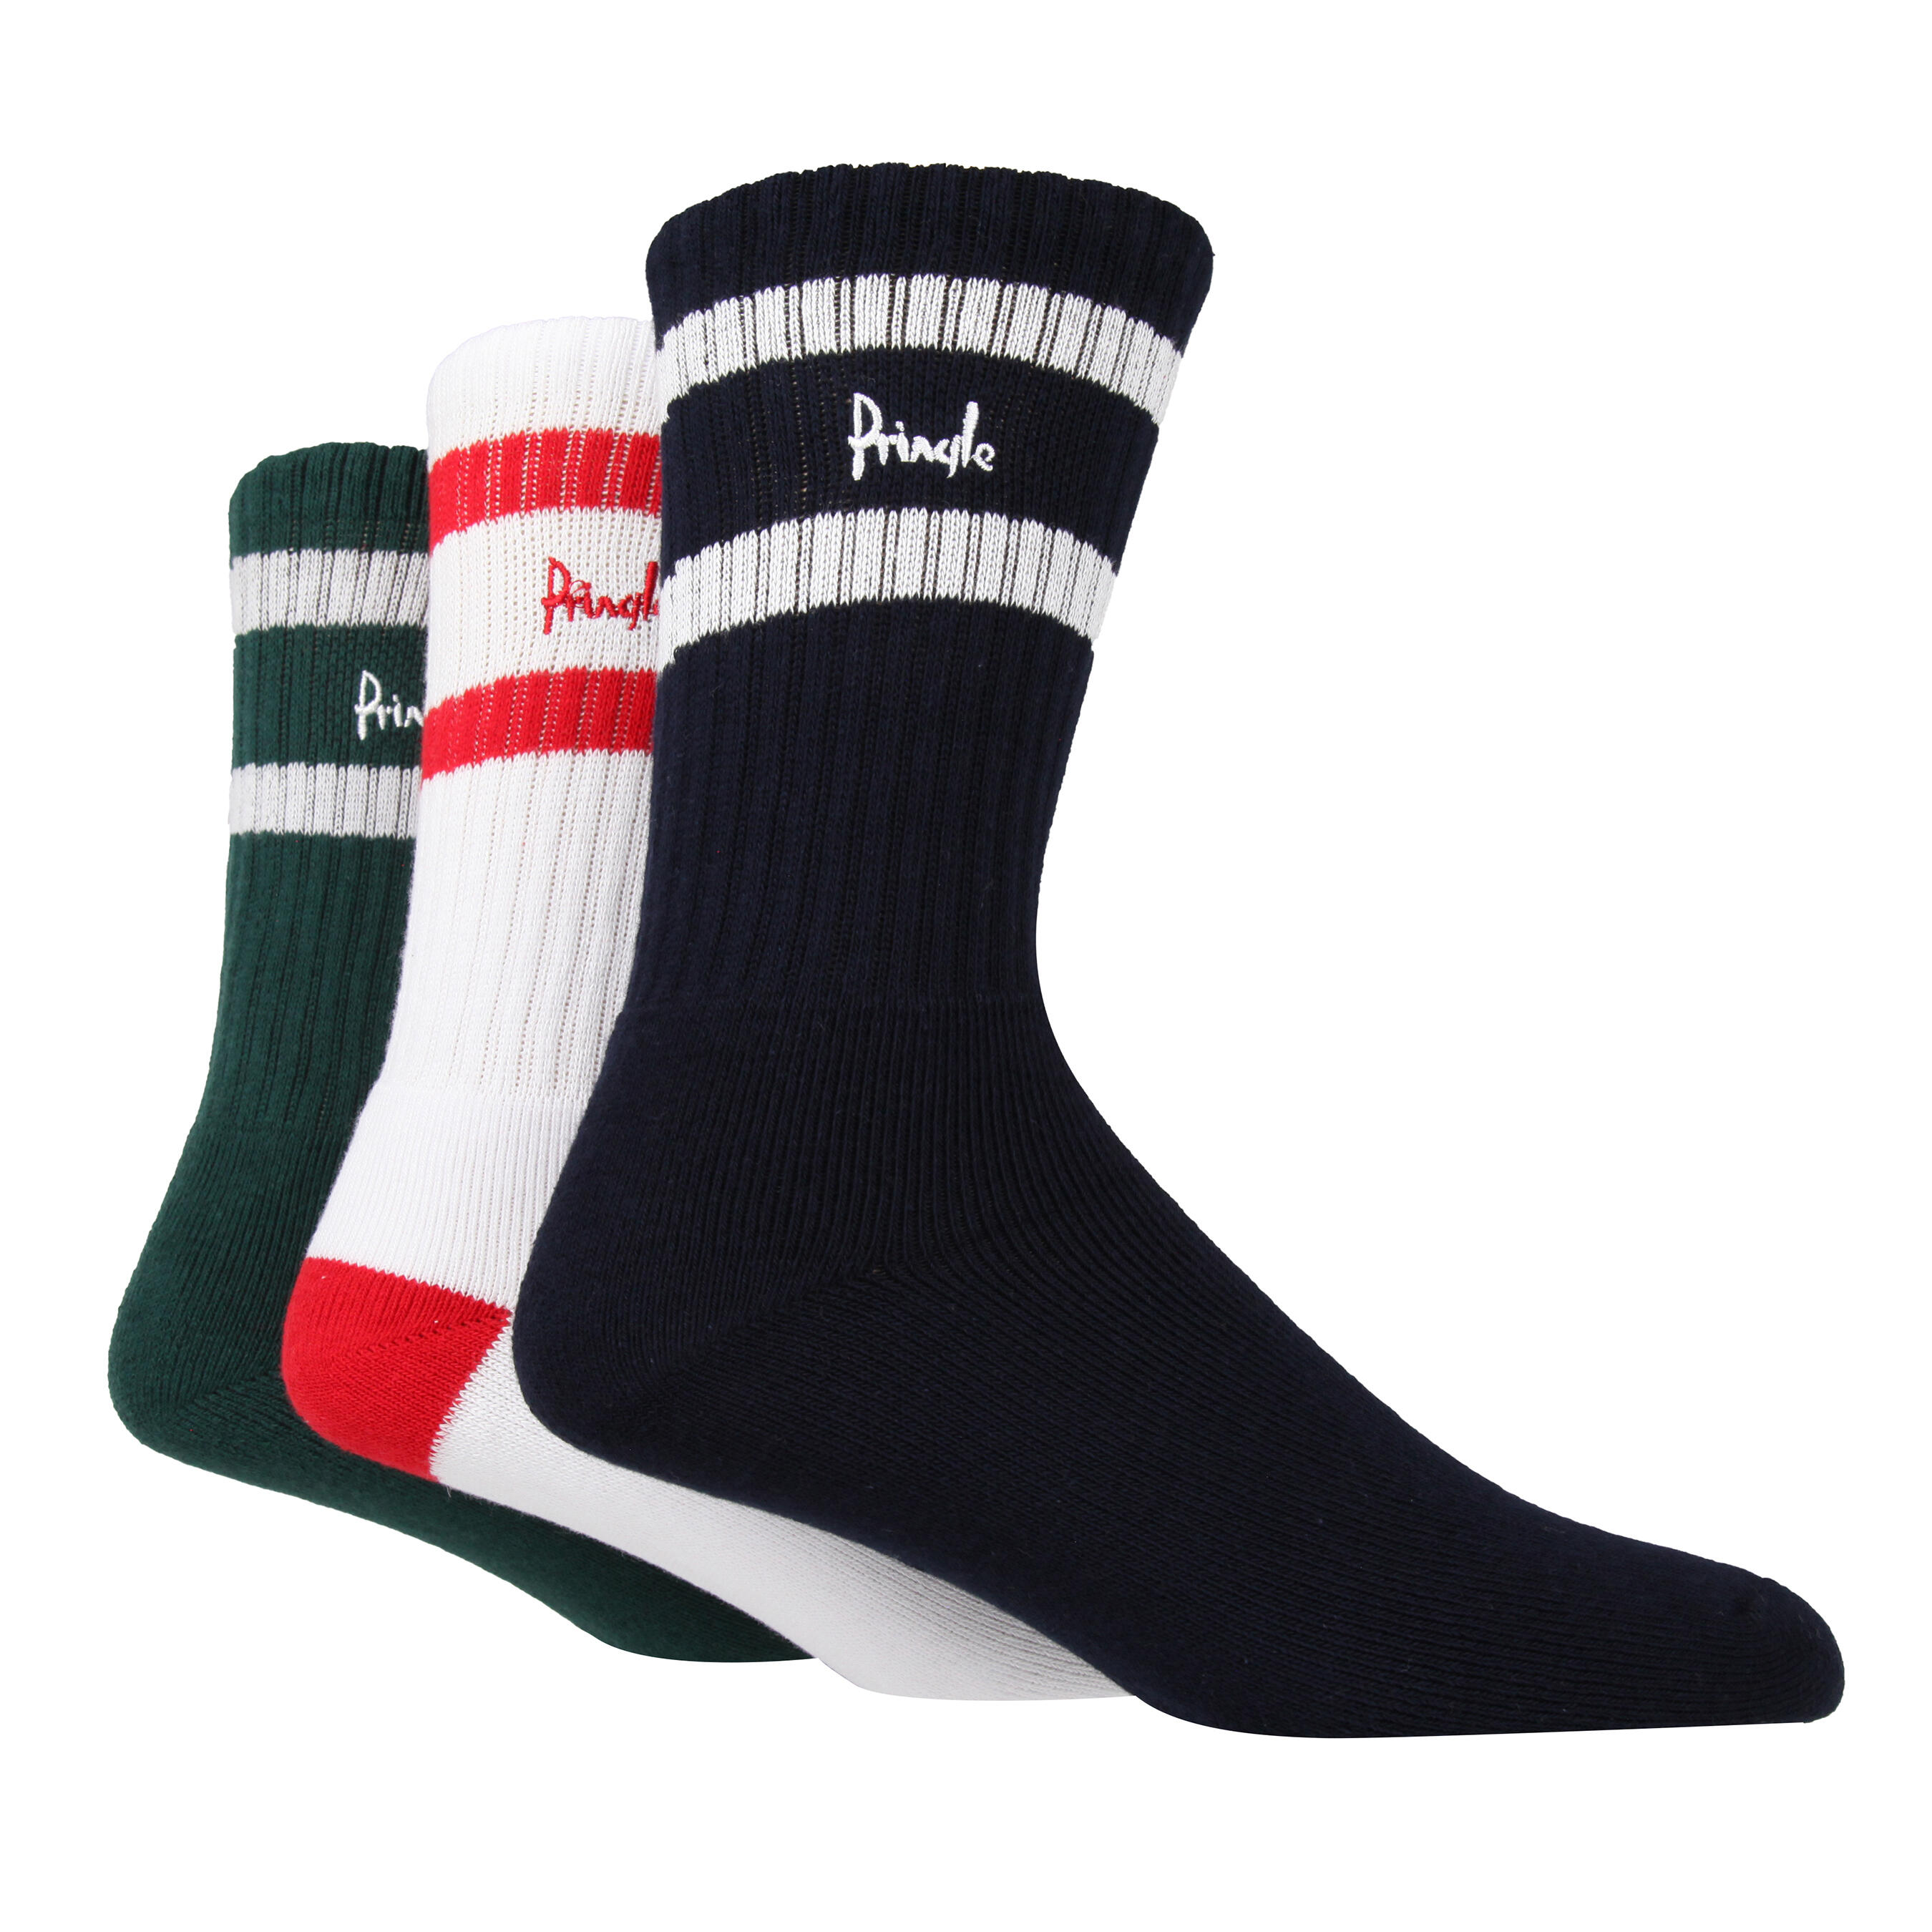 PRINGLE OF SCOTLAND P2050 Mens Sports Socks with Fully Cushioned Foot Fashion Mix 3